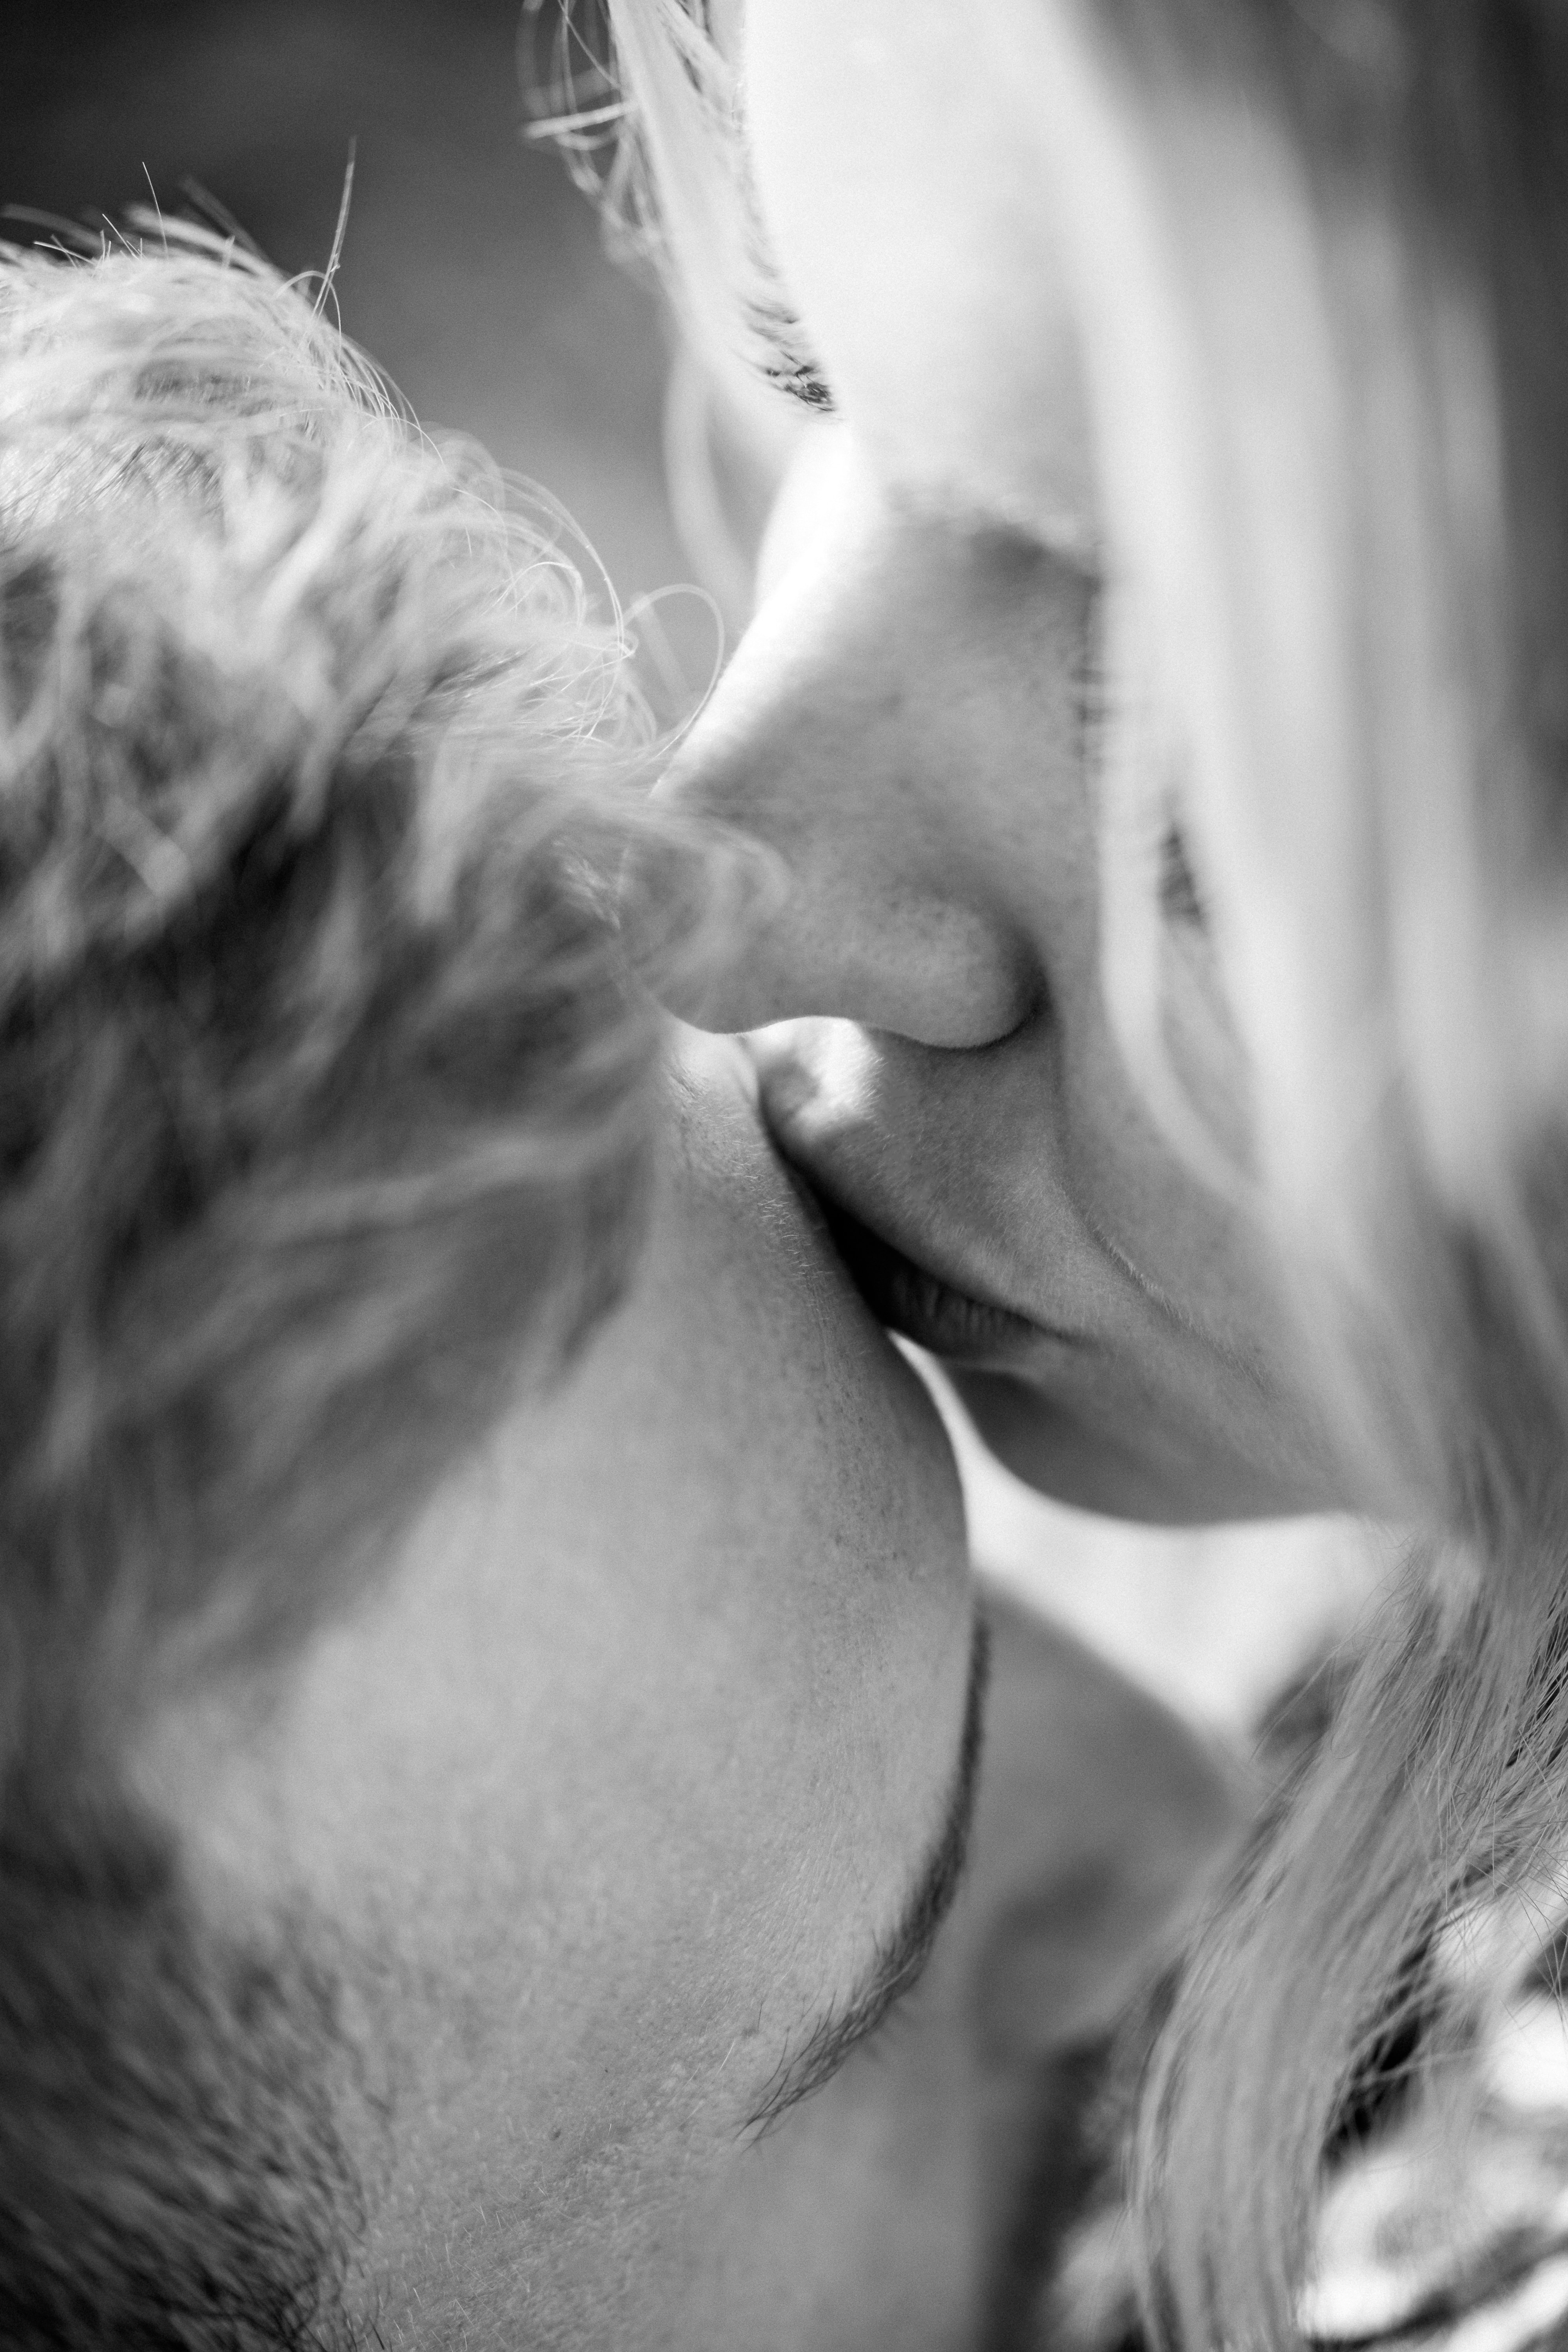 A photo of a woman giving a man a peck on the forehead | Source: Unsplash